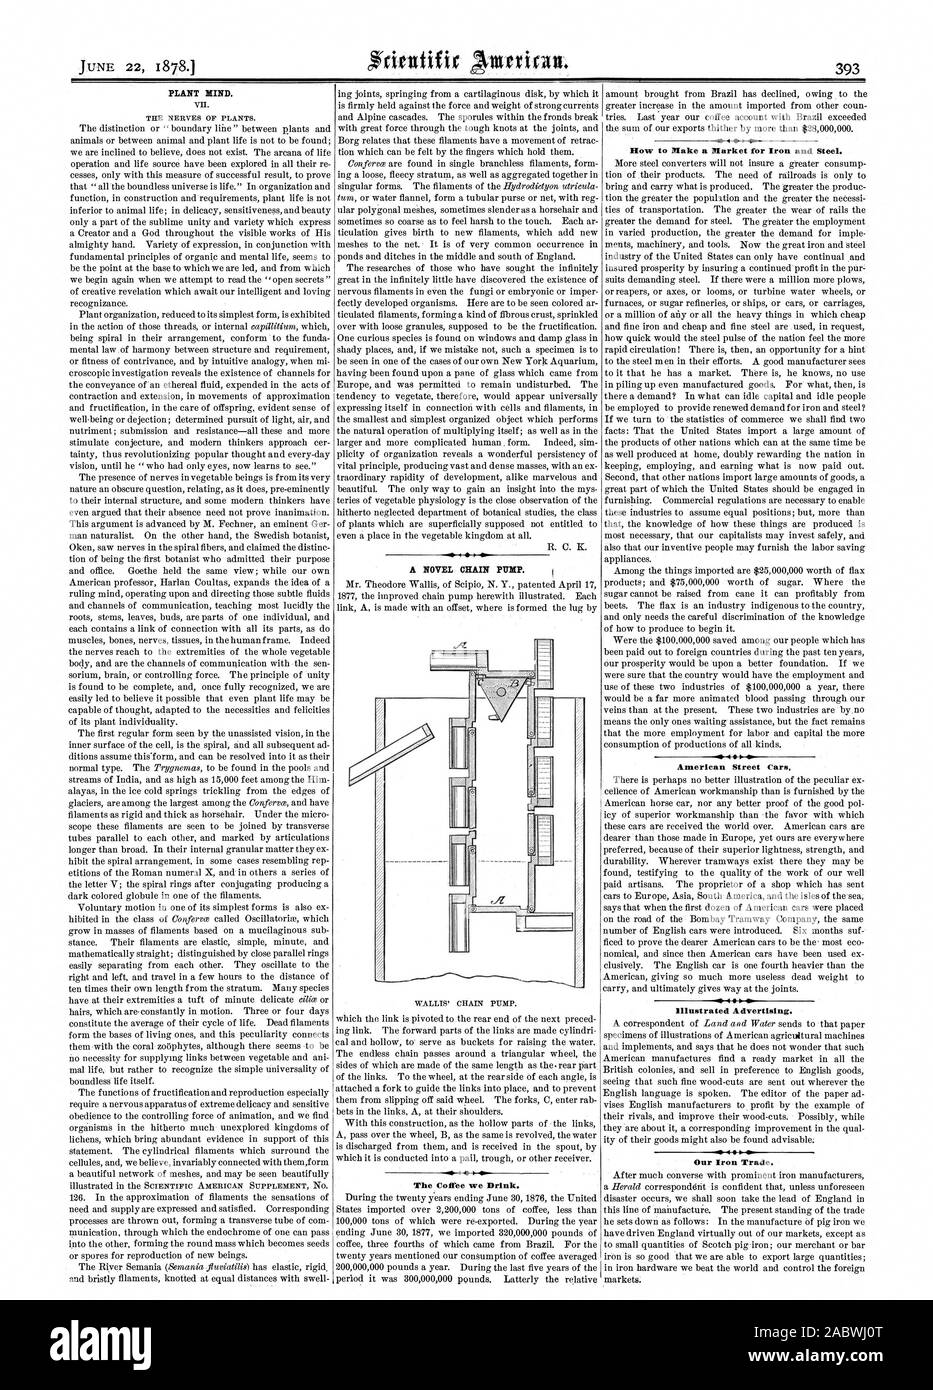 PLANT MIND. VII. THE NERVES OF PLANTS. A NOVEL CHAIN PUMP. The Coffee we Drink. How to Make a Market for Iron and Steel. American Street Cars. Illustrated Advertising. Our Iron Trade., scientific american, 1878-06-22 Stock Photo